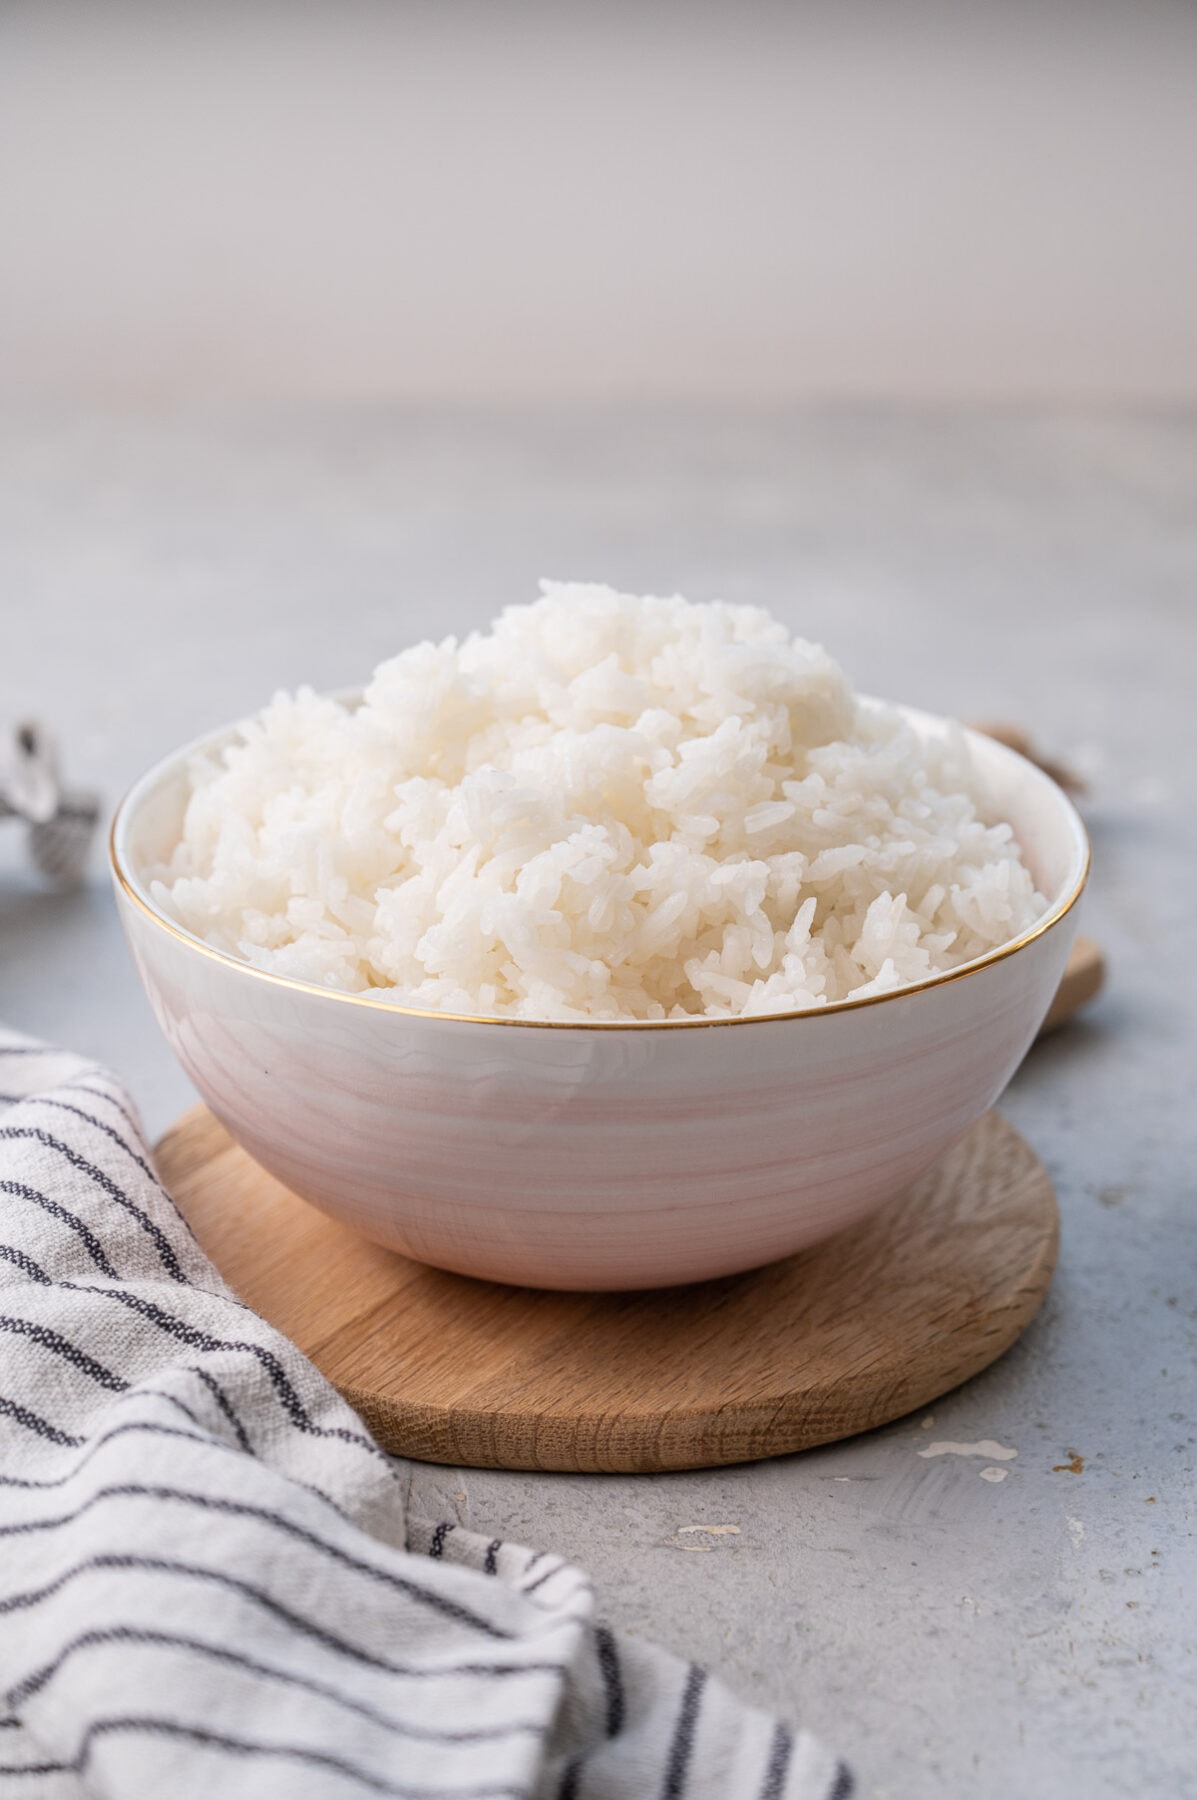 https://www.everyday-delicious.com/wp-content/uploads/2022/05/jasmin-rice-everyday-delicious-2-1197x1800.jpg